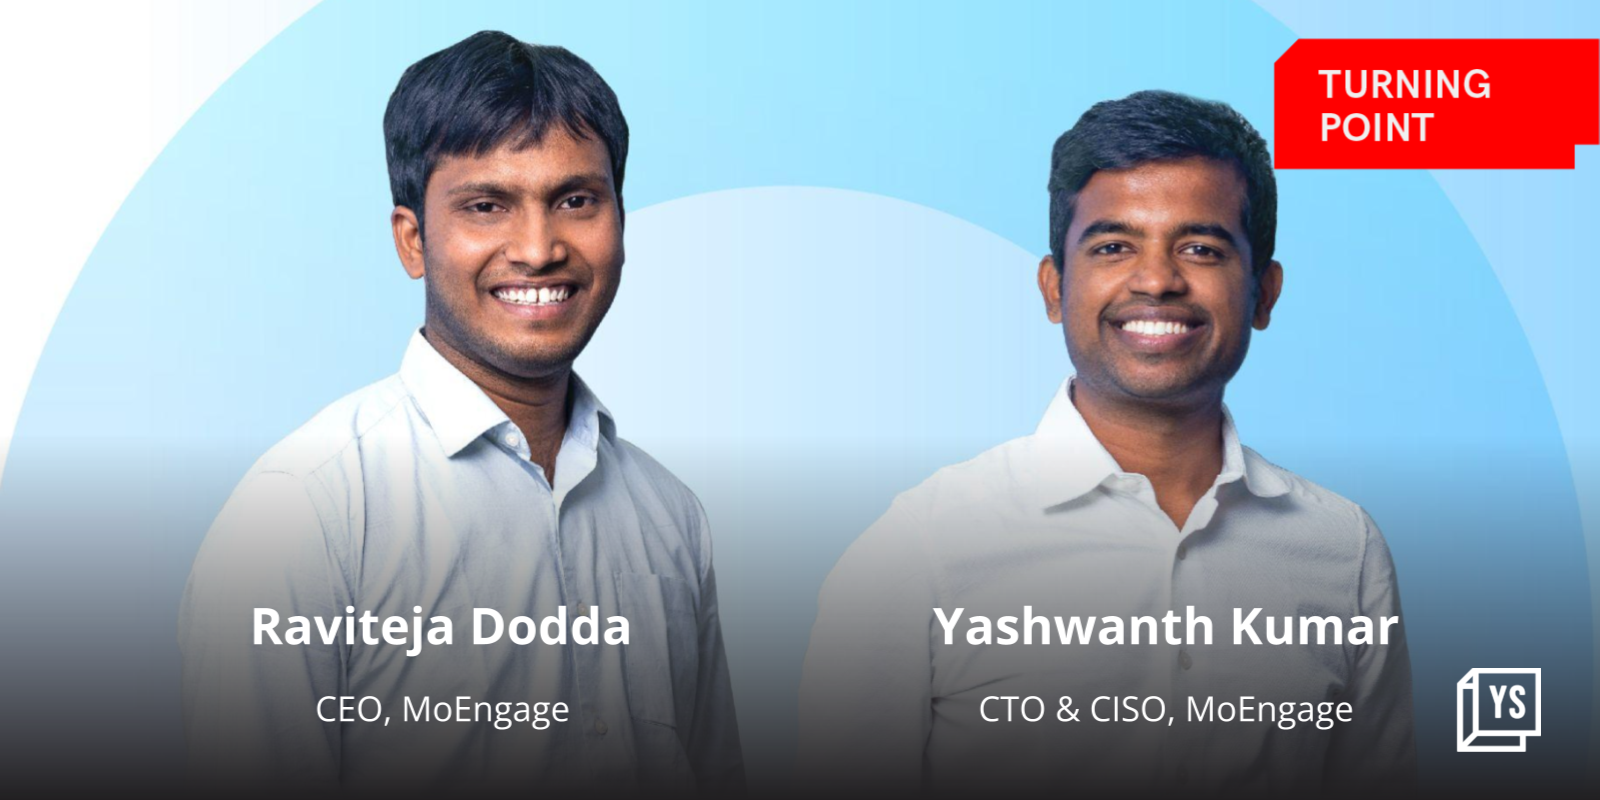 How a continuous hunt for customer retention led these entrepreneurs to build MoEngage